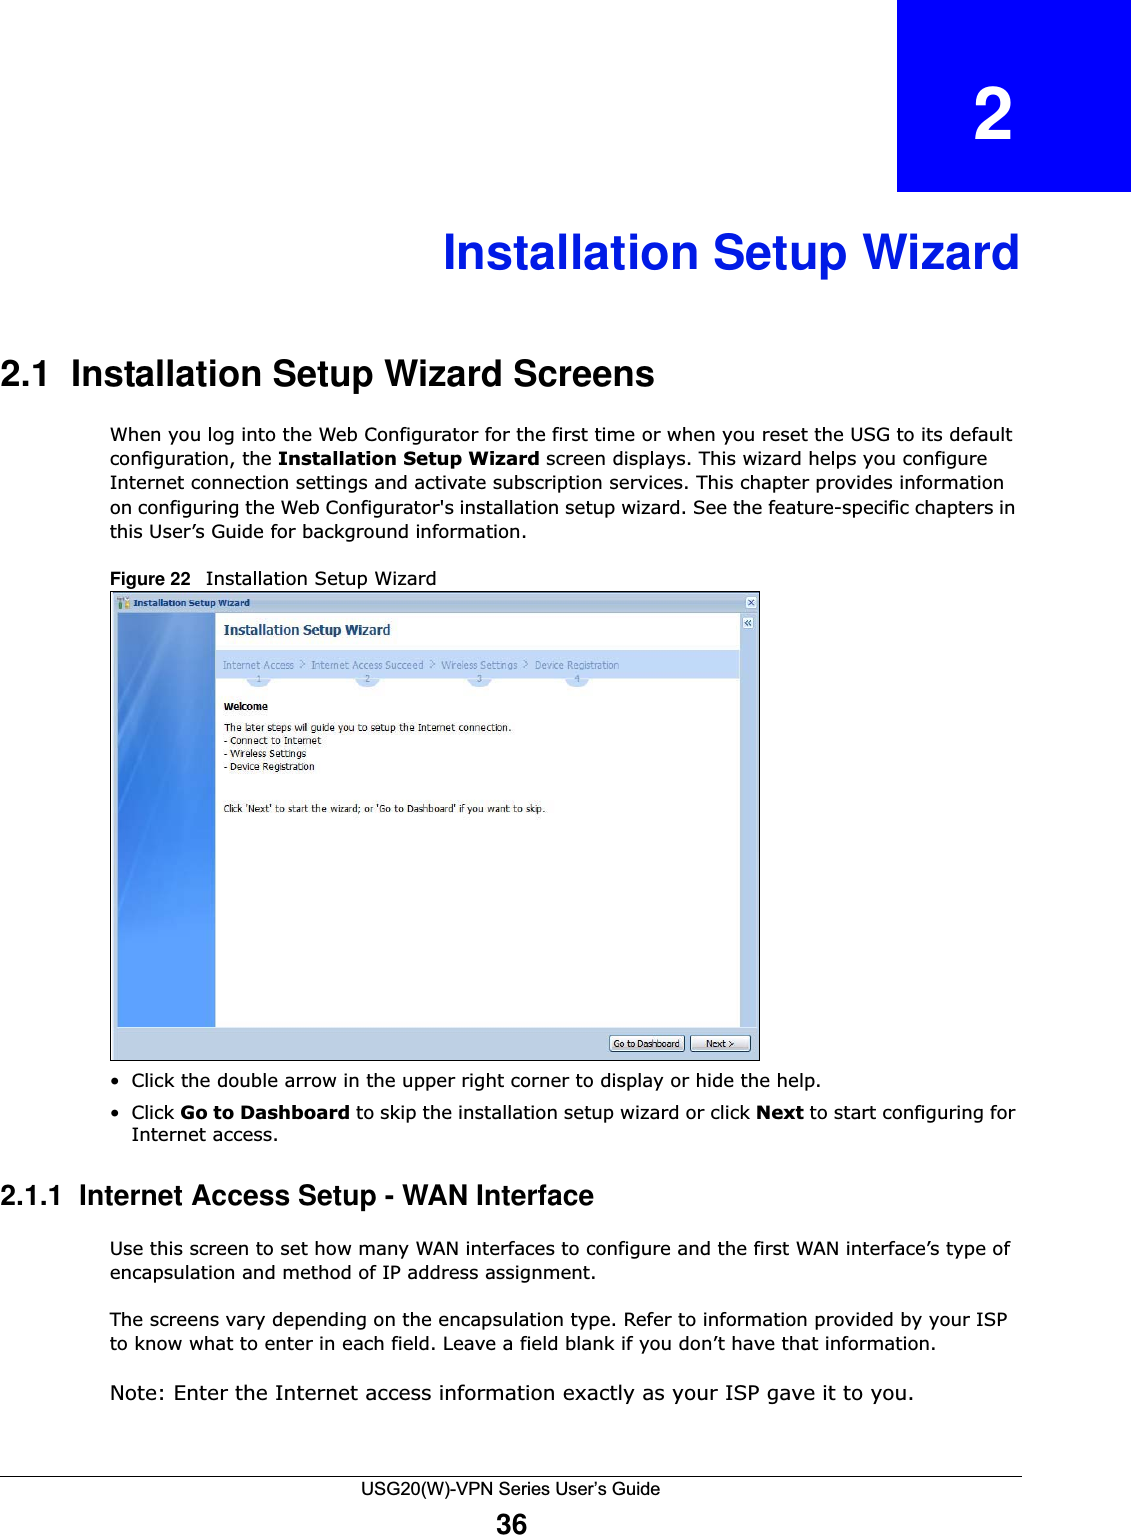 USG20(W)-VPN Series User’s Guide36CHAPTER   2Installation Setup Wizard2.1  Installation Setup Wizard Screens When you log into the Web Configurator for the first time or when you reset the USG to its default configuration, the Installation Setup Wizard screen displays. This wizard helps you configure Internet connection settings and activate subscription services. This chapter provides information on configuring the Web Configurator&apos;s installation setup wizard. See the feature-specific chapters in this User’s Guide for background information. Figure 22   Installation Setup Wizard    • Click the double arrow in the upper right corner to display or hide the help.• Click Go to Dashboard to skip the installation setup wizard or click Next to start configuring for Internet access.2.1.1  Internet Access Setup - WAN Interface Use this screen to set how many WAN interfaces to configure and the first WAN interface’s type of encapsulation and method of IP address assignment.The screens vary depending on the encapsulation type. Refer to information provided by your ISP to know what to enter in each field. Leave a field blank if you don’t have that information. Note: Enter the Internet access information exactly as your ISP gave it to you.